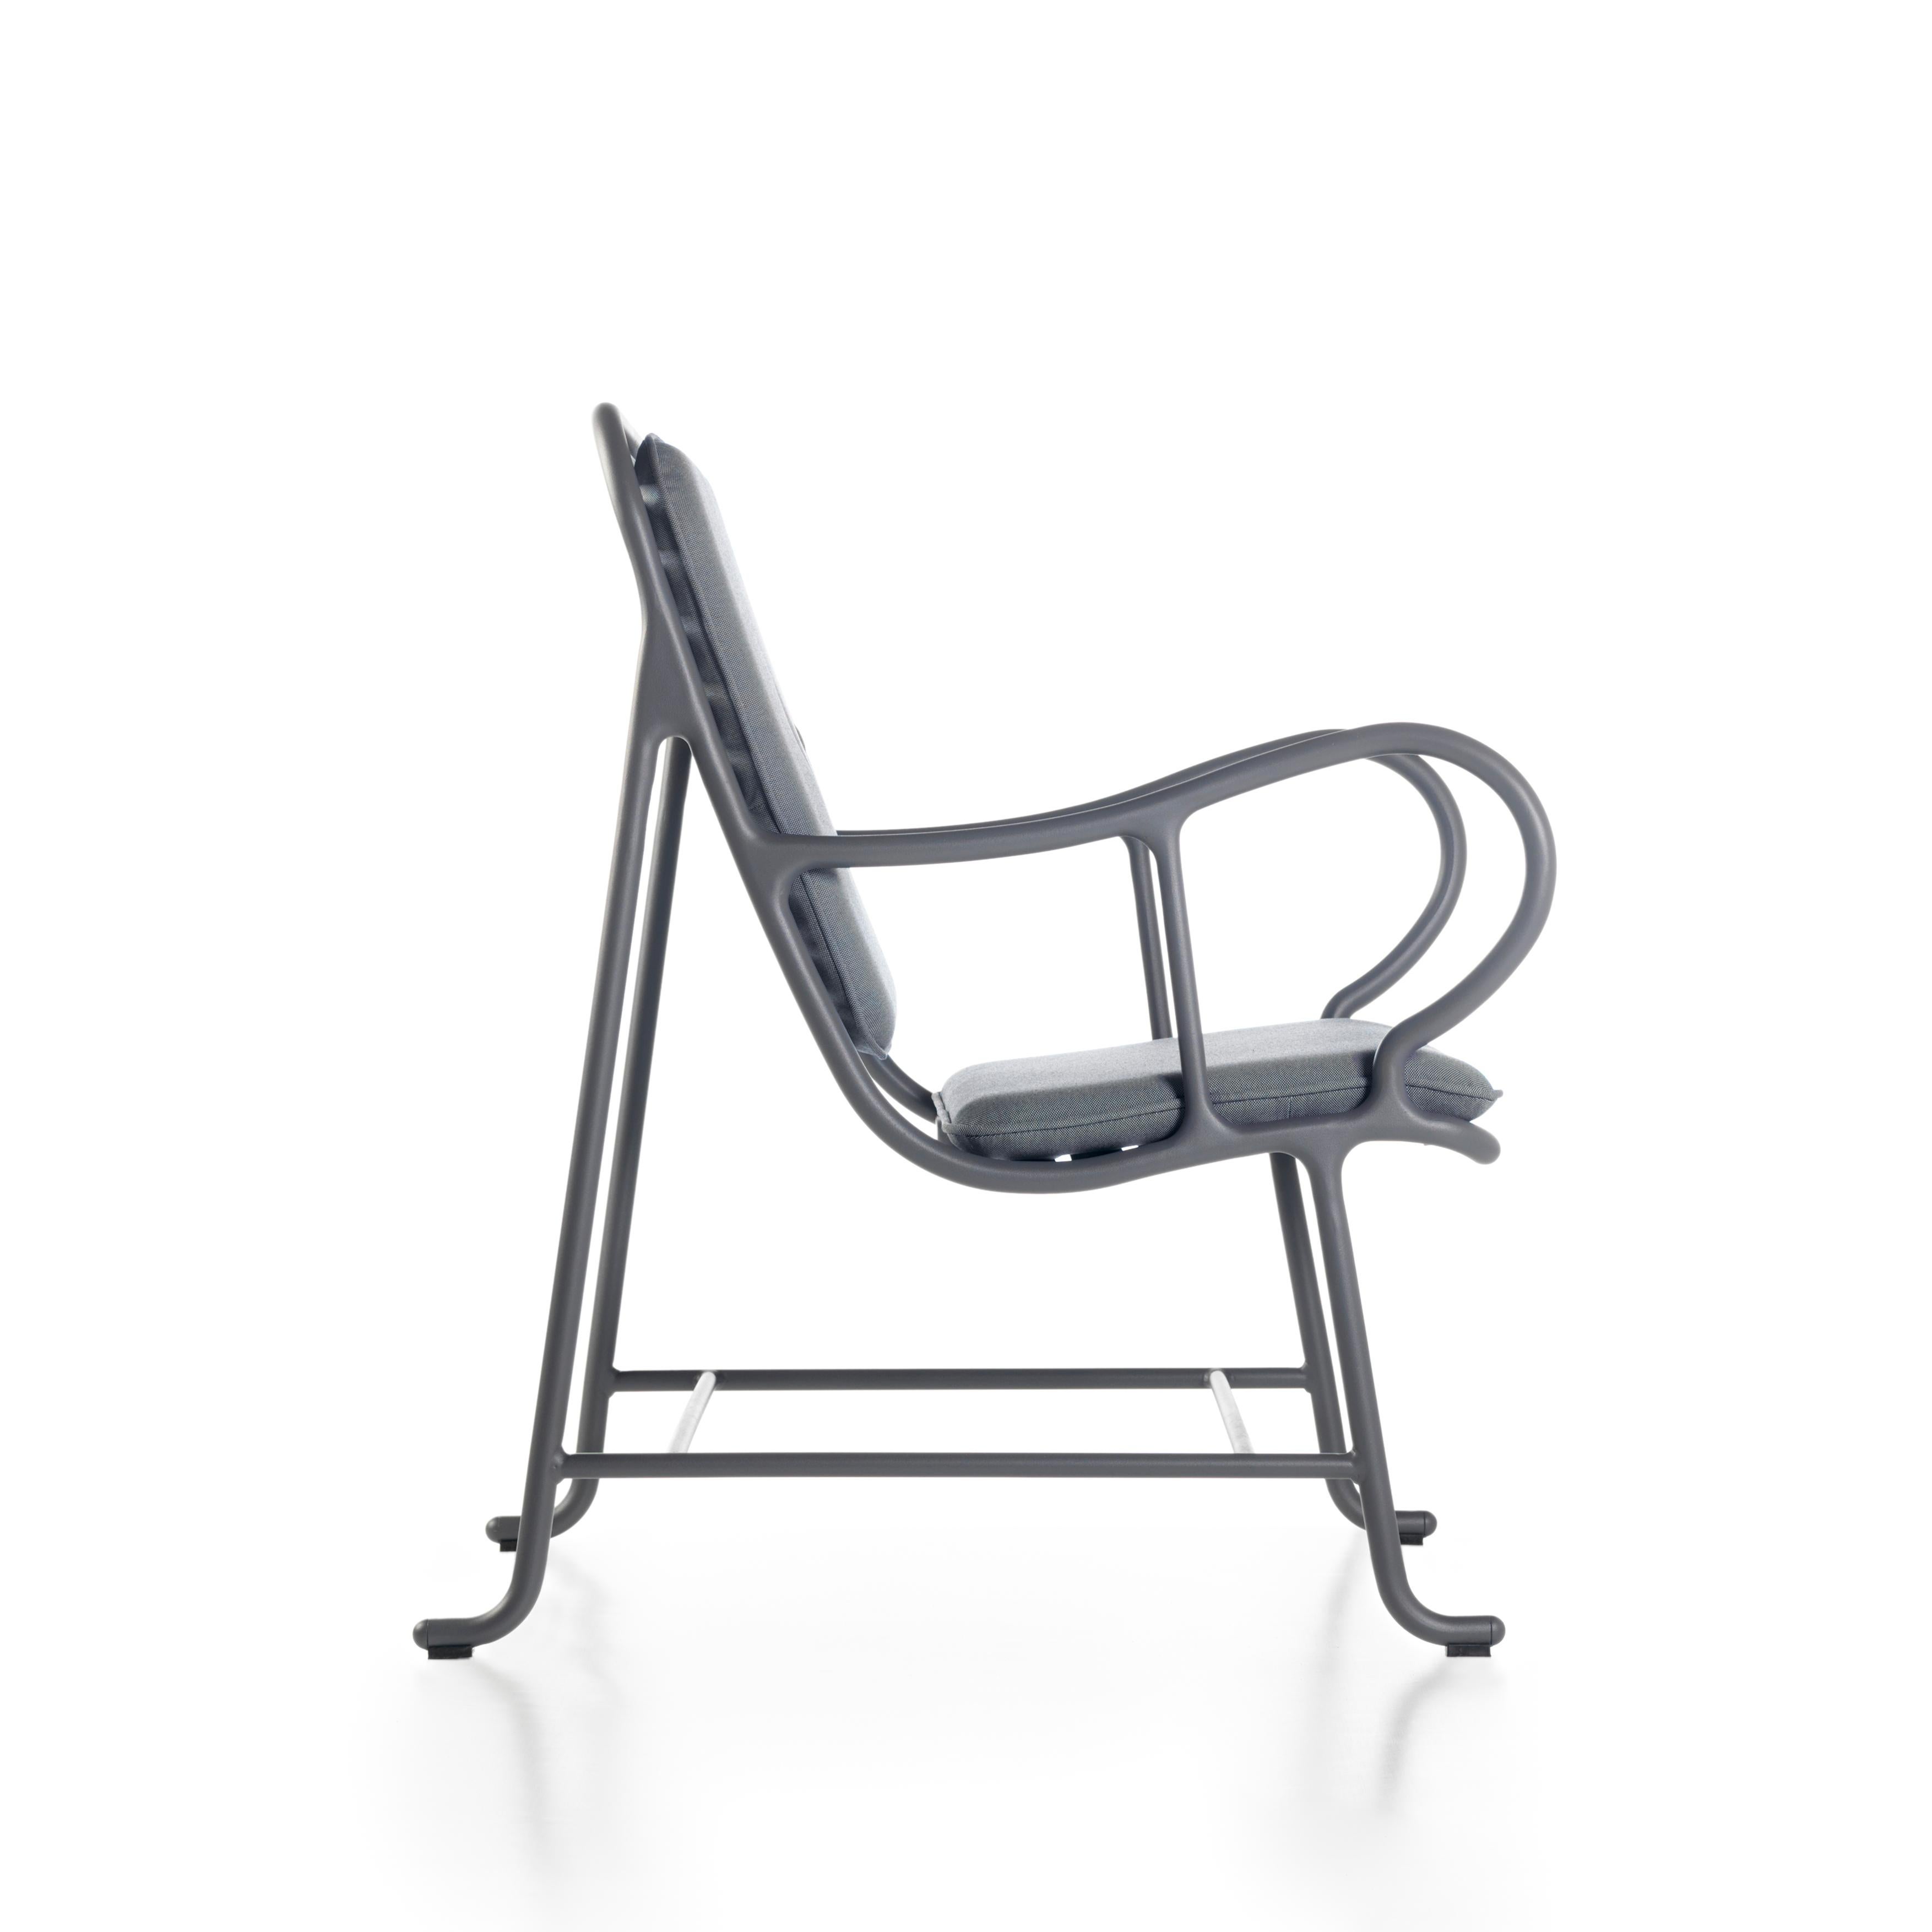 The Gardenias collection is the second largest collection by Jaime Hayon for BD.
Structure made of cast and extruded aluminium. Powder-coated grey (RAL 7015) with Alesta by Axalta. 

Removable upholstery and removable cushion covers, waterproof and